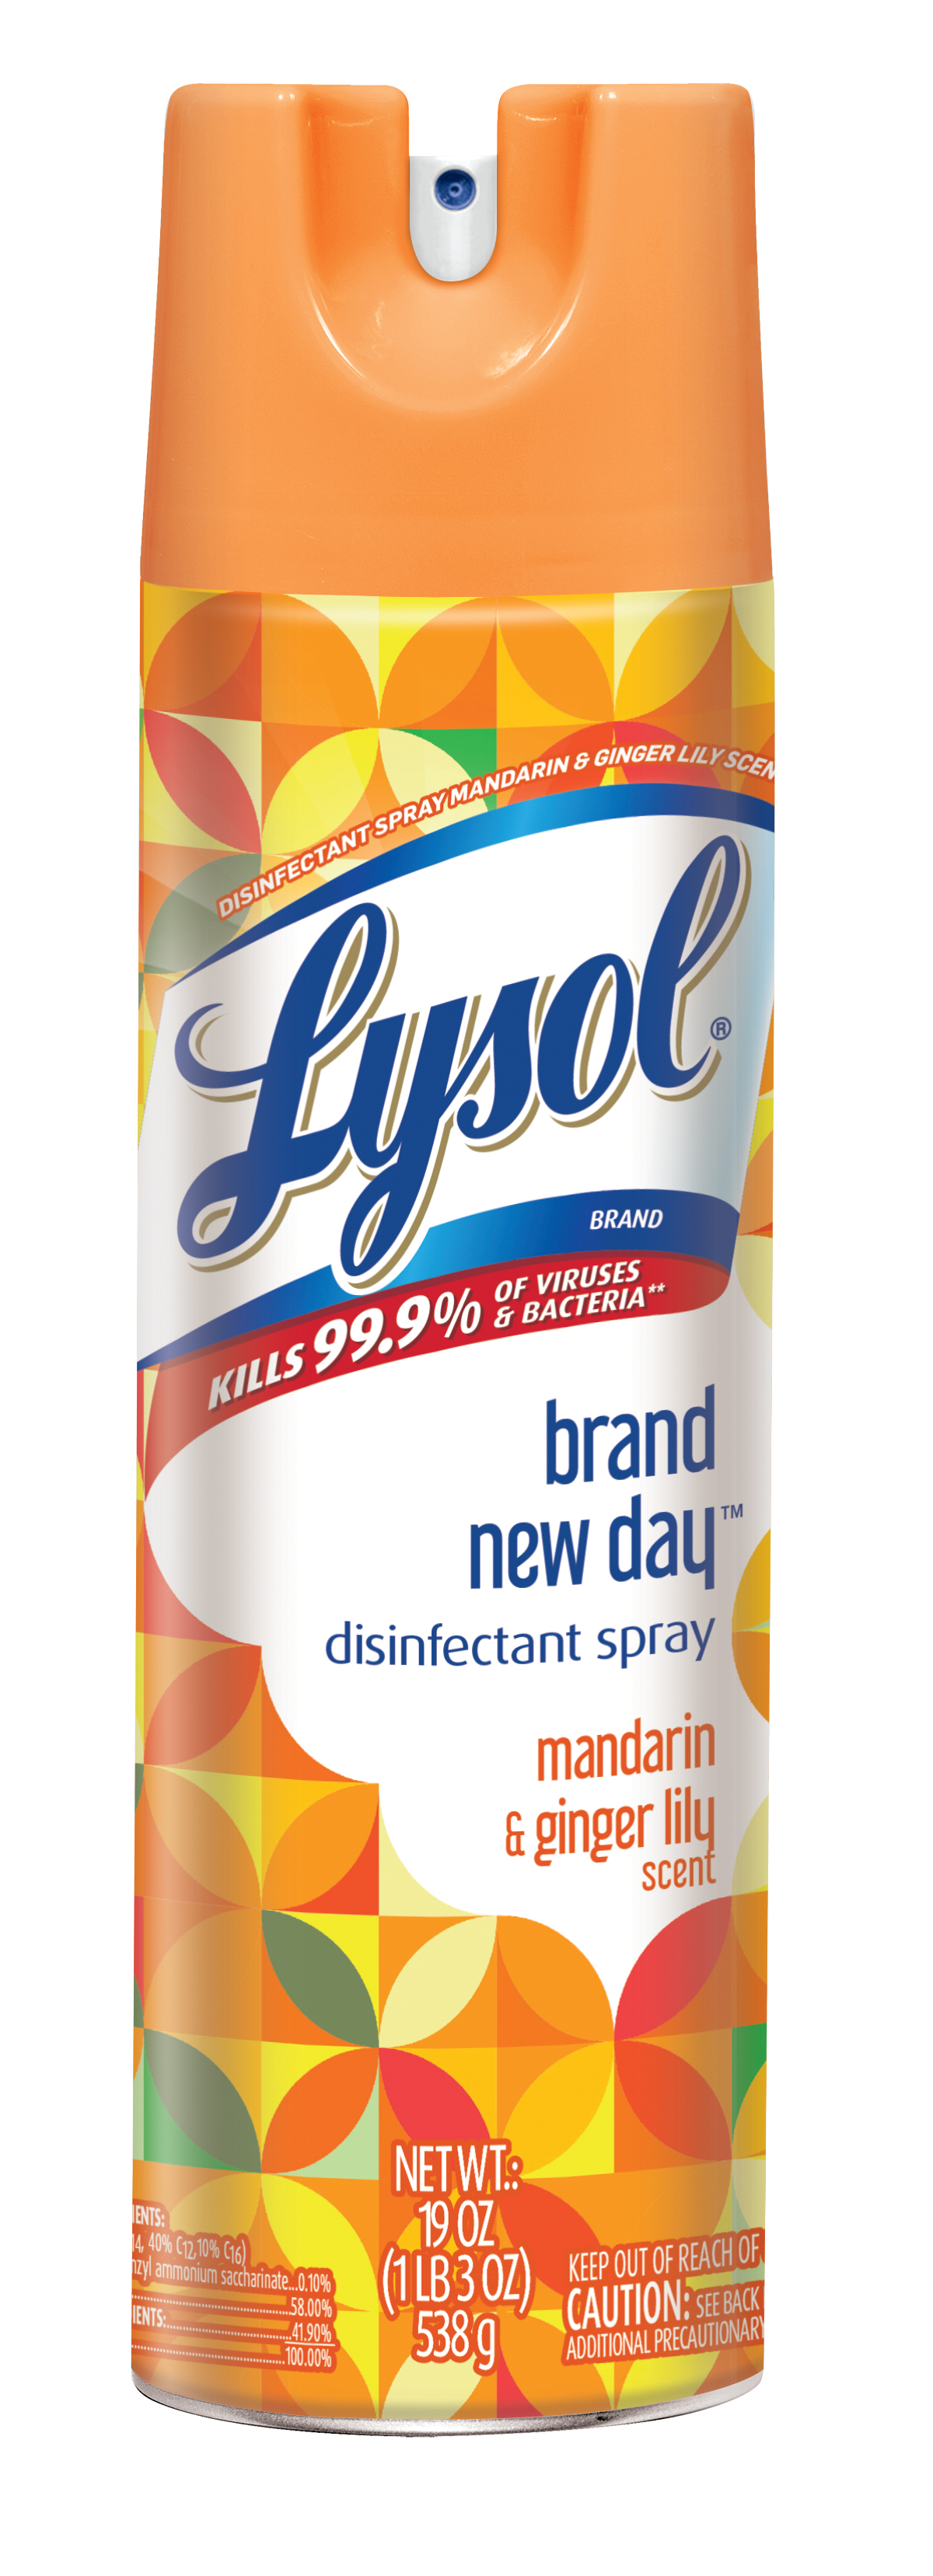 LYSOL® Disinfectant Spray - Brand New Day™ Mandarin & Ginger Lily